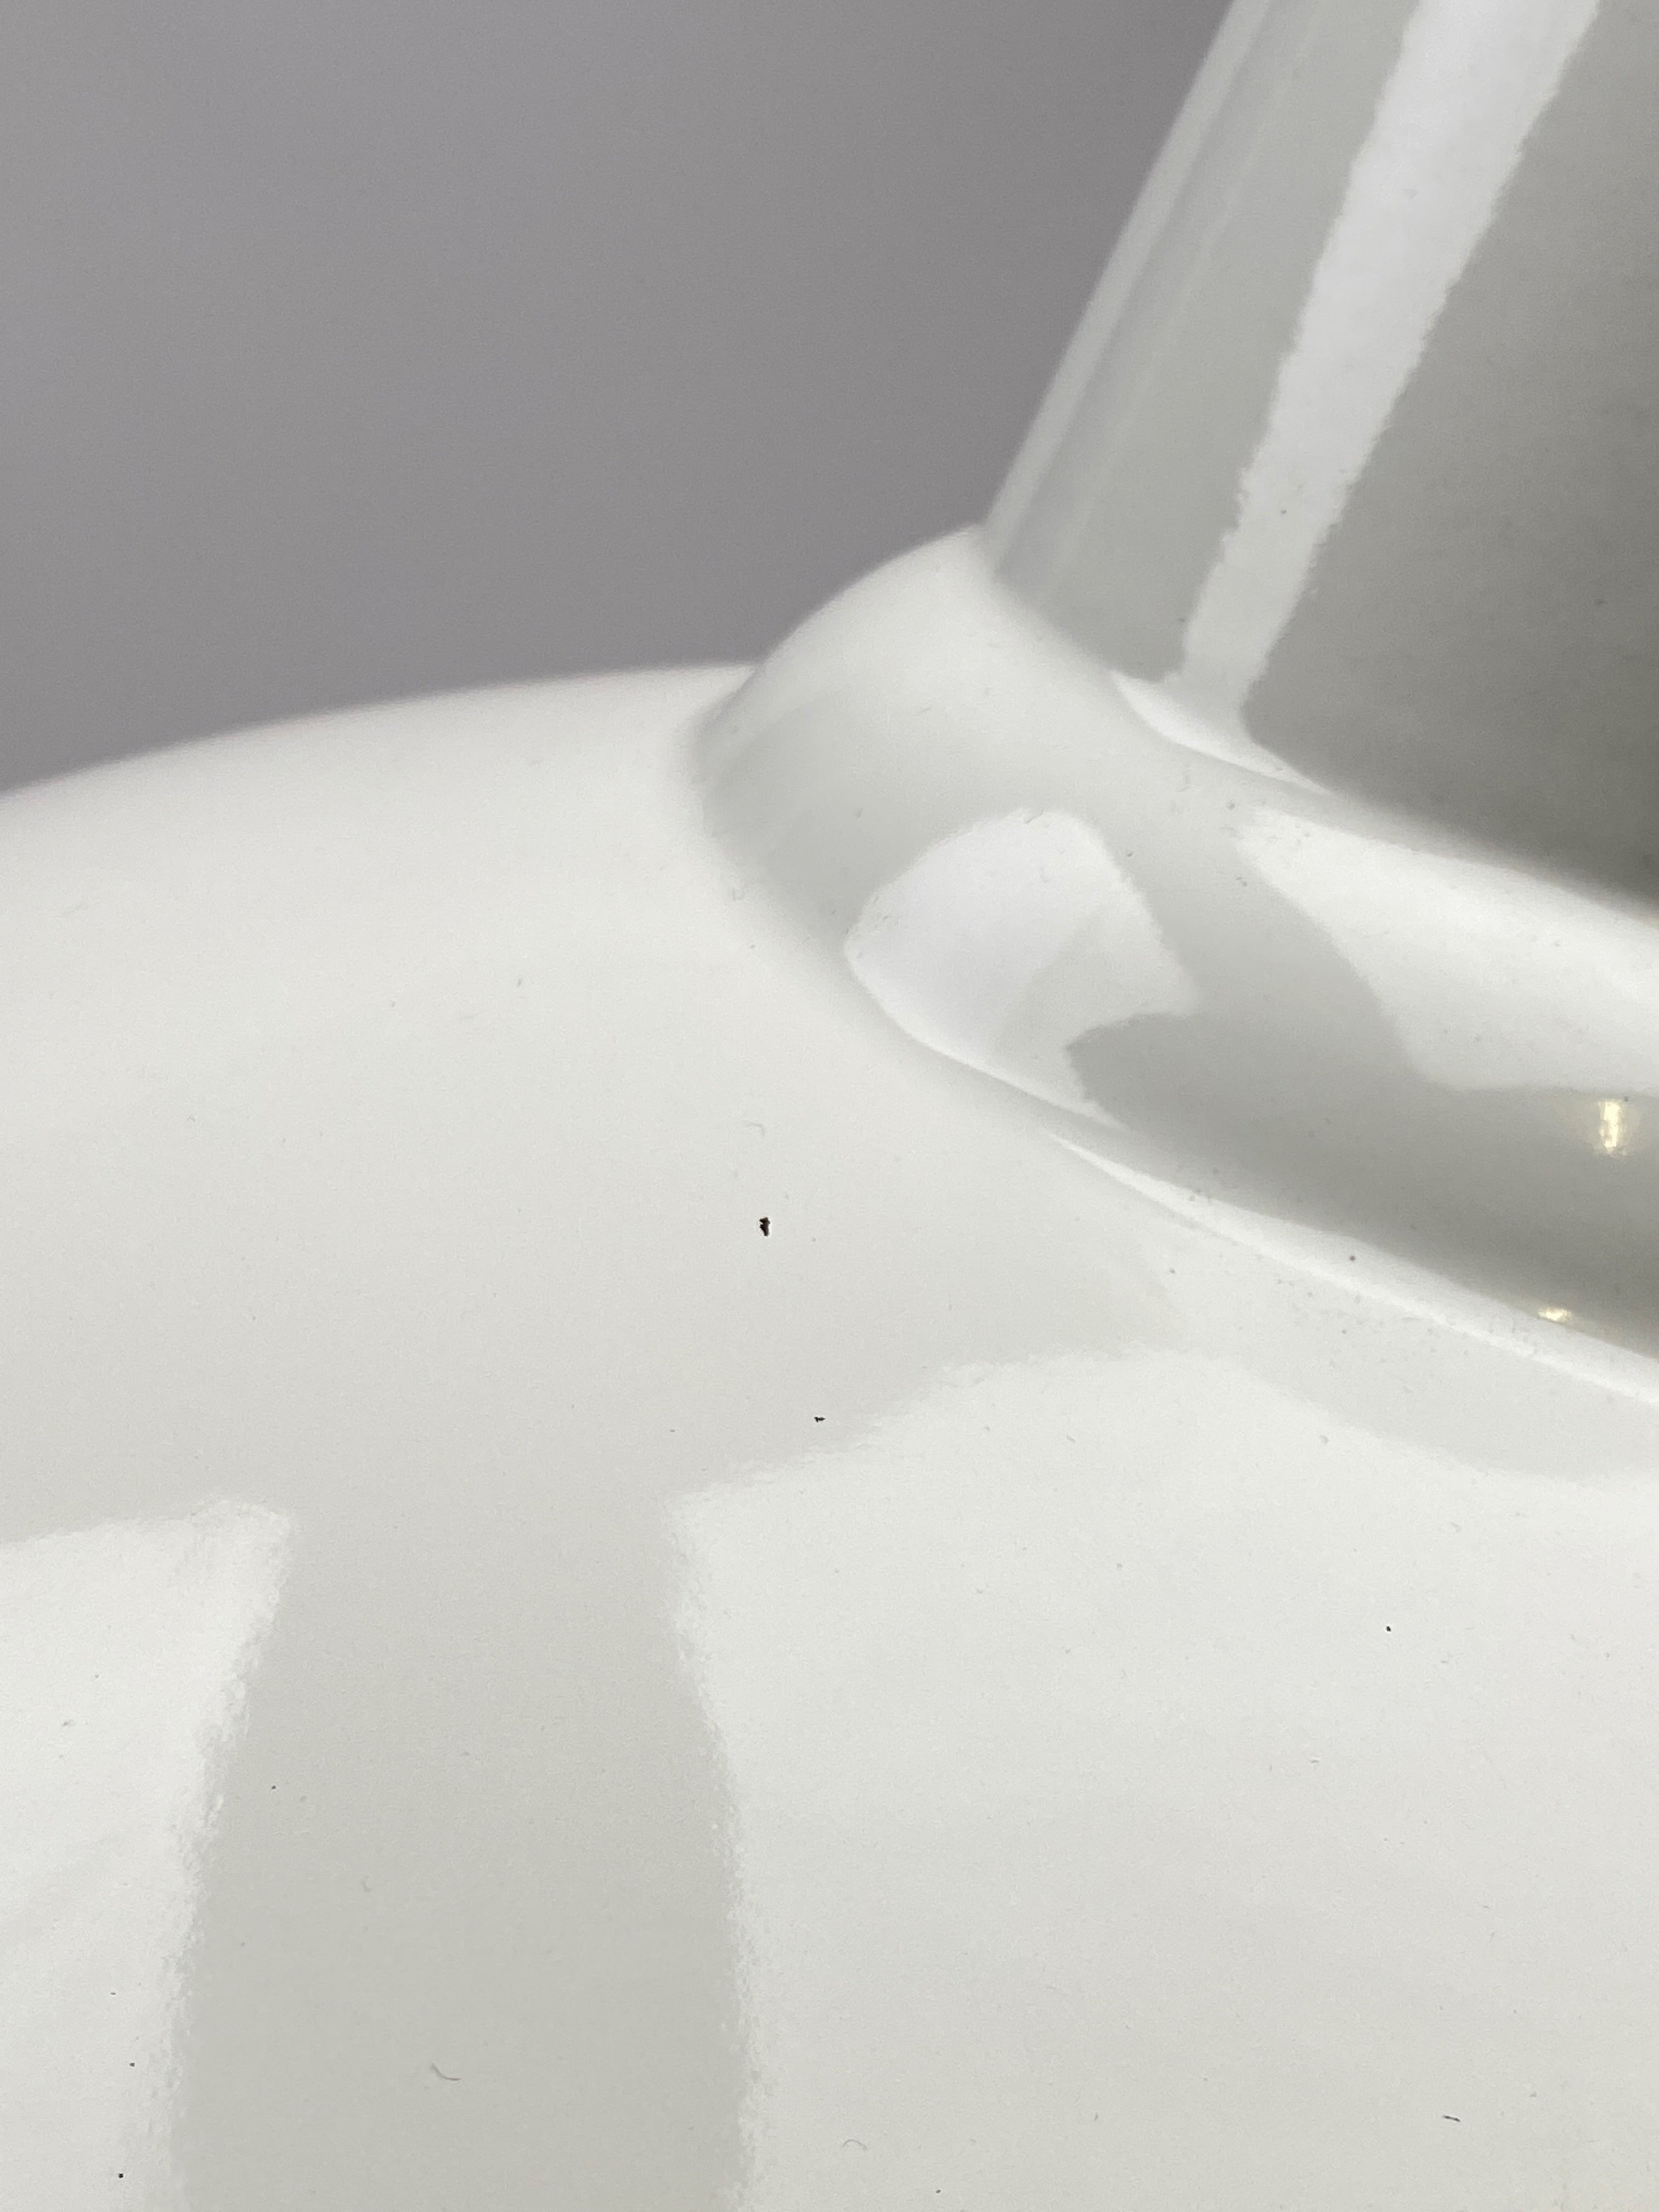 Example of Grade B damage that may be visible on a Worn Lighting Shade. Image shows minor chips/mark to the top of a white shade.